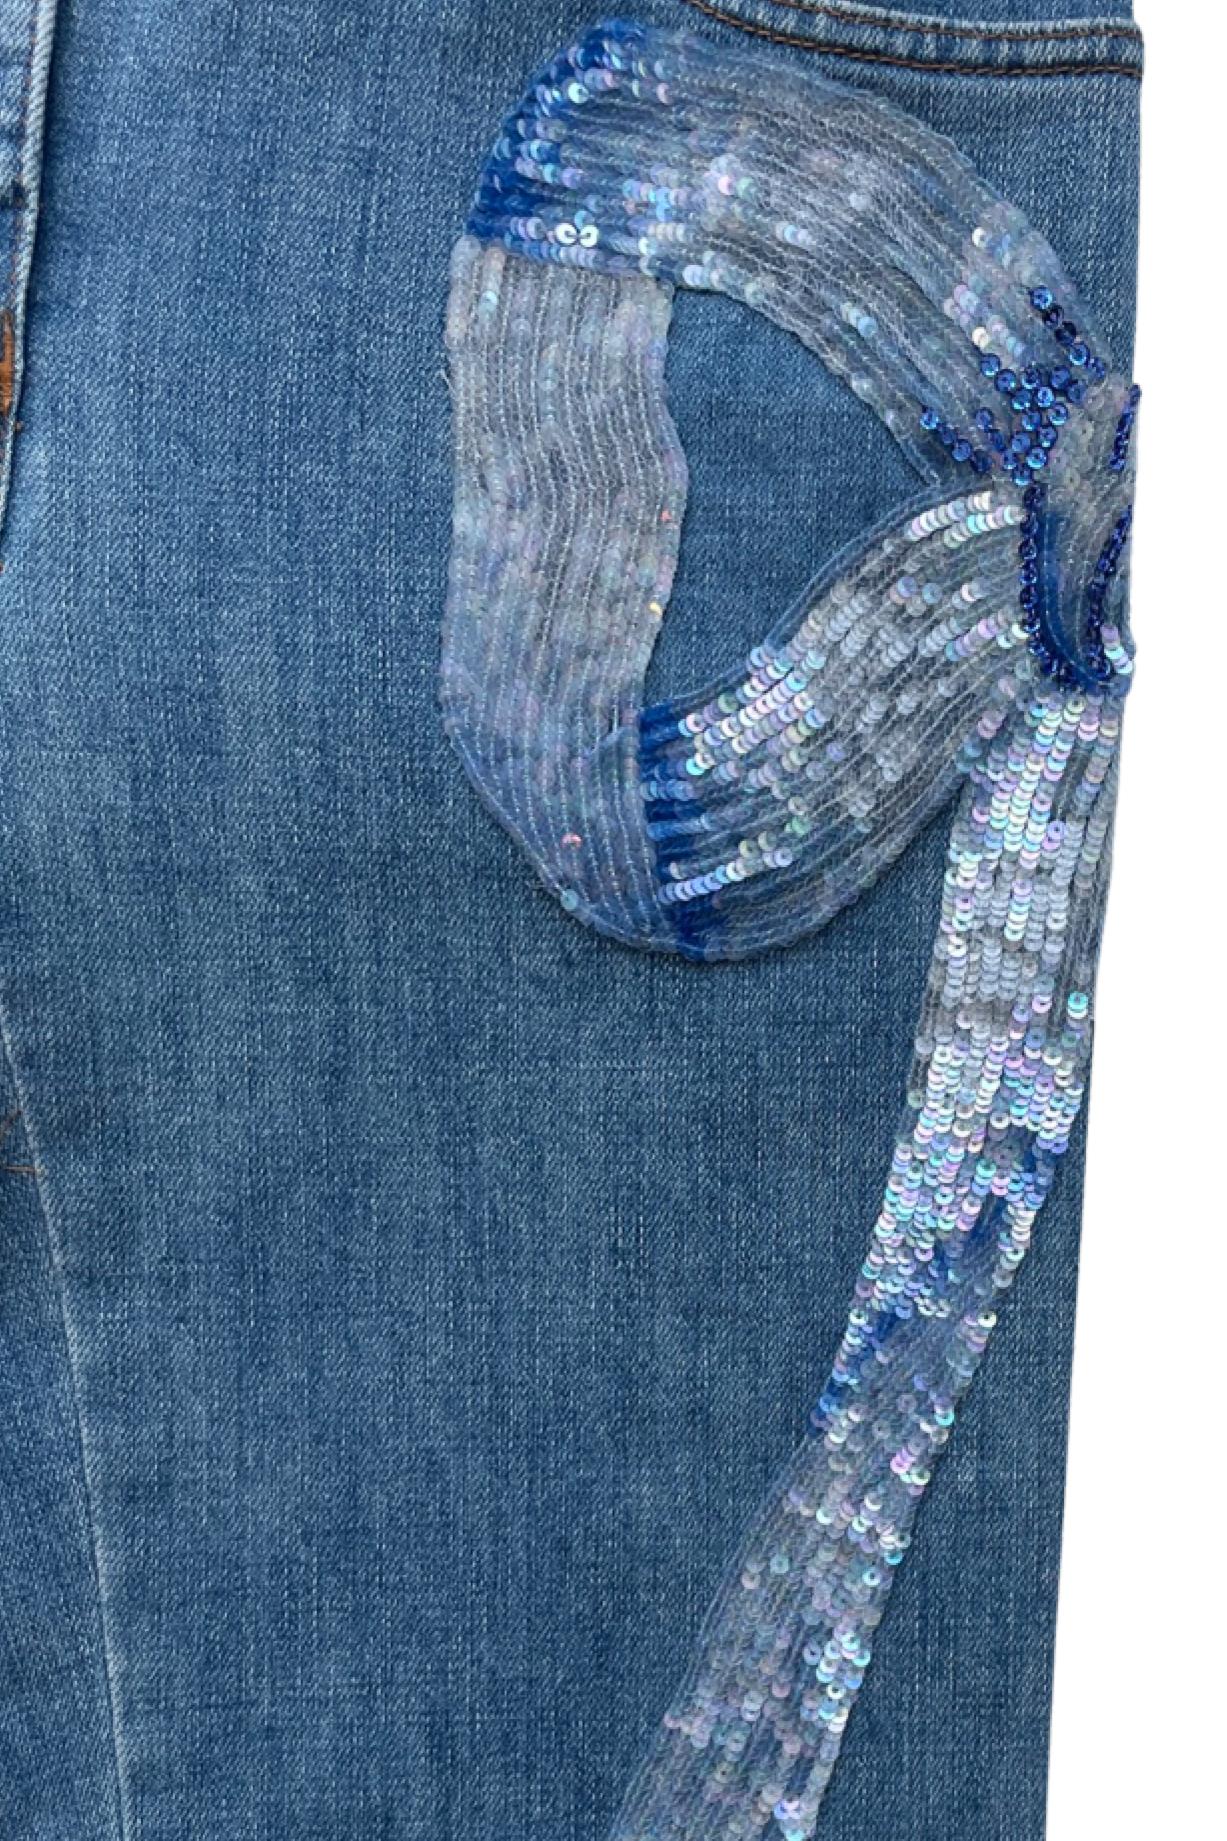 Valentino Sequin Bow Print Jeans 2006 In Excellent Condition For Sale In Los Angeles, CA